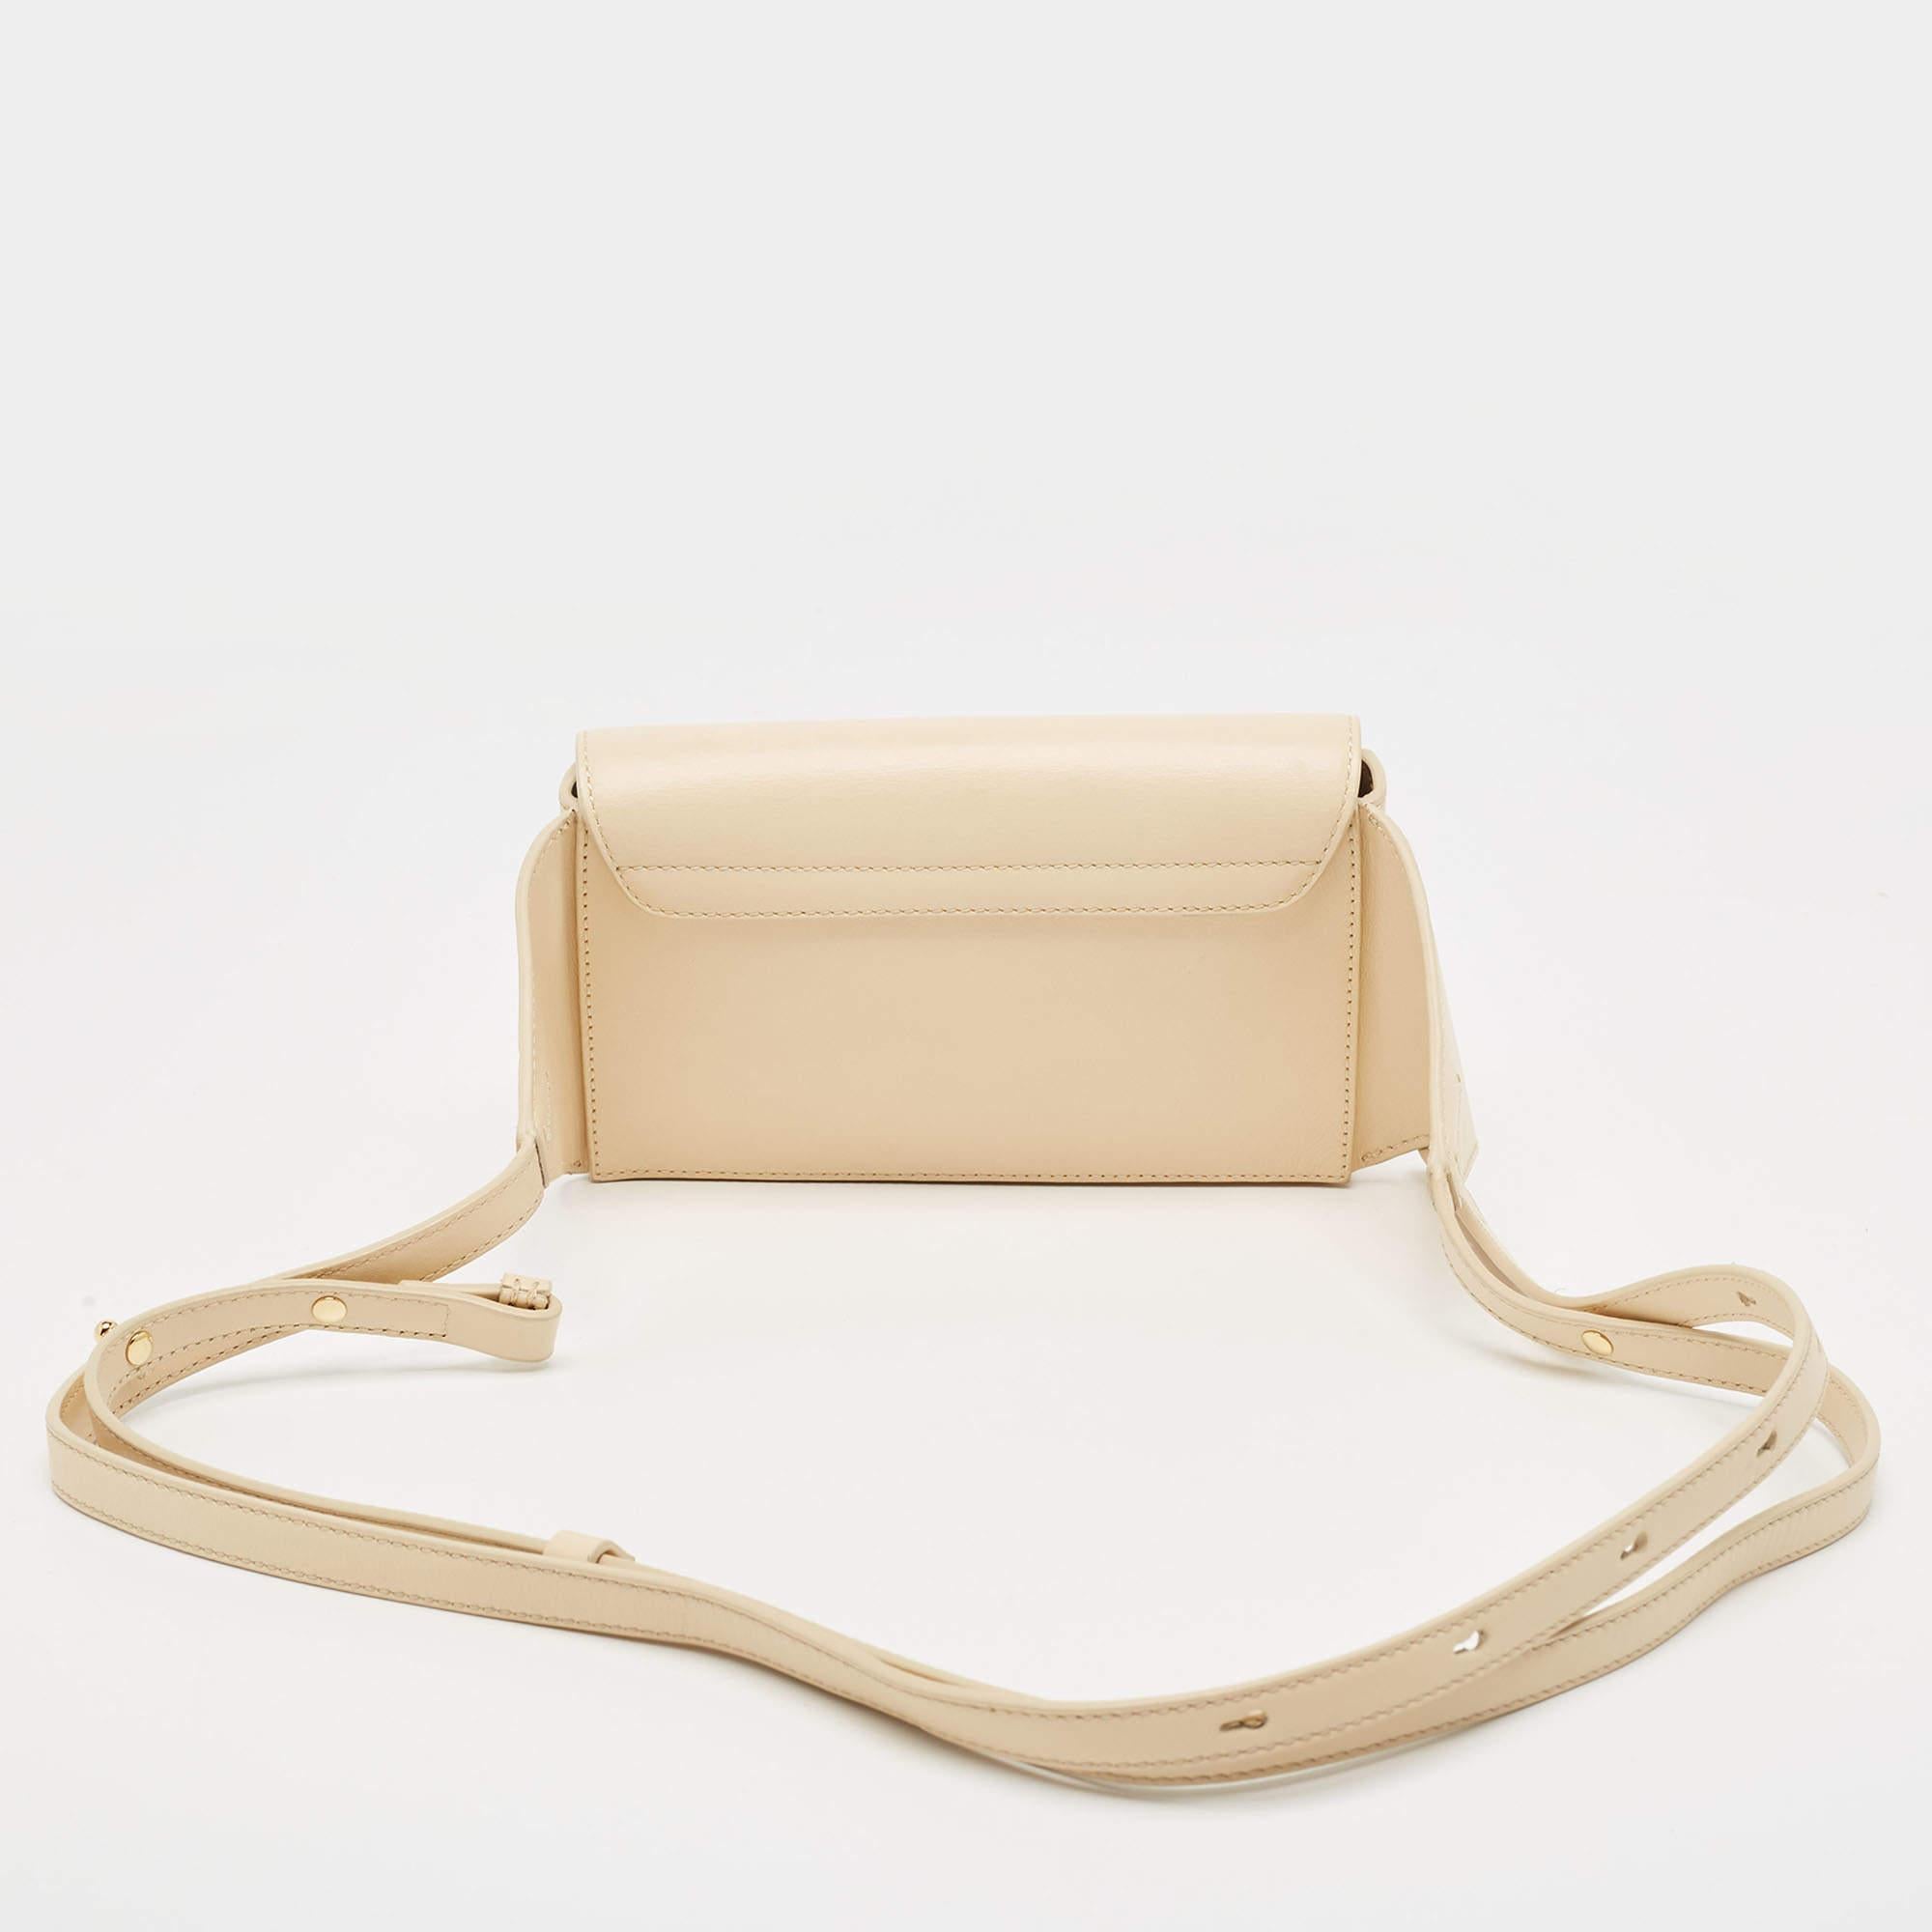 Chloe Cream Leather and Suede Chloe C Belt Bag For Sale 10